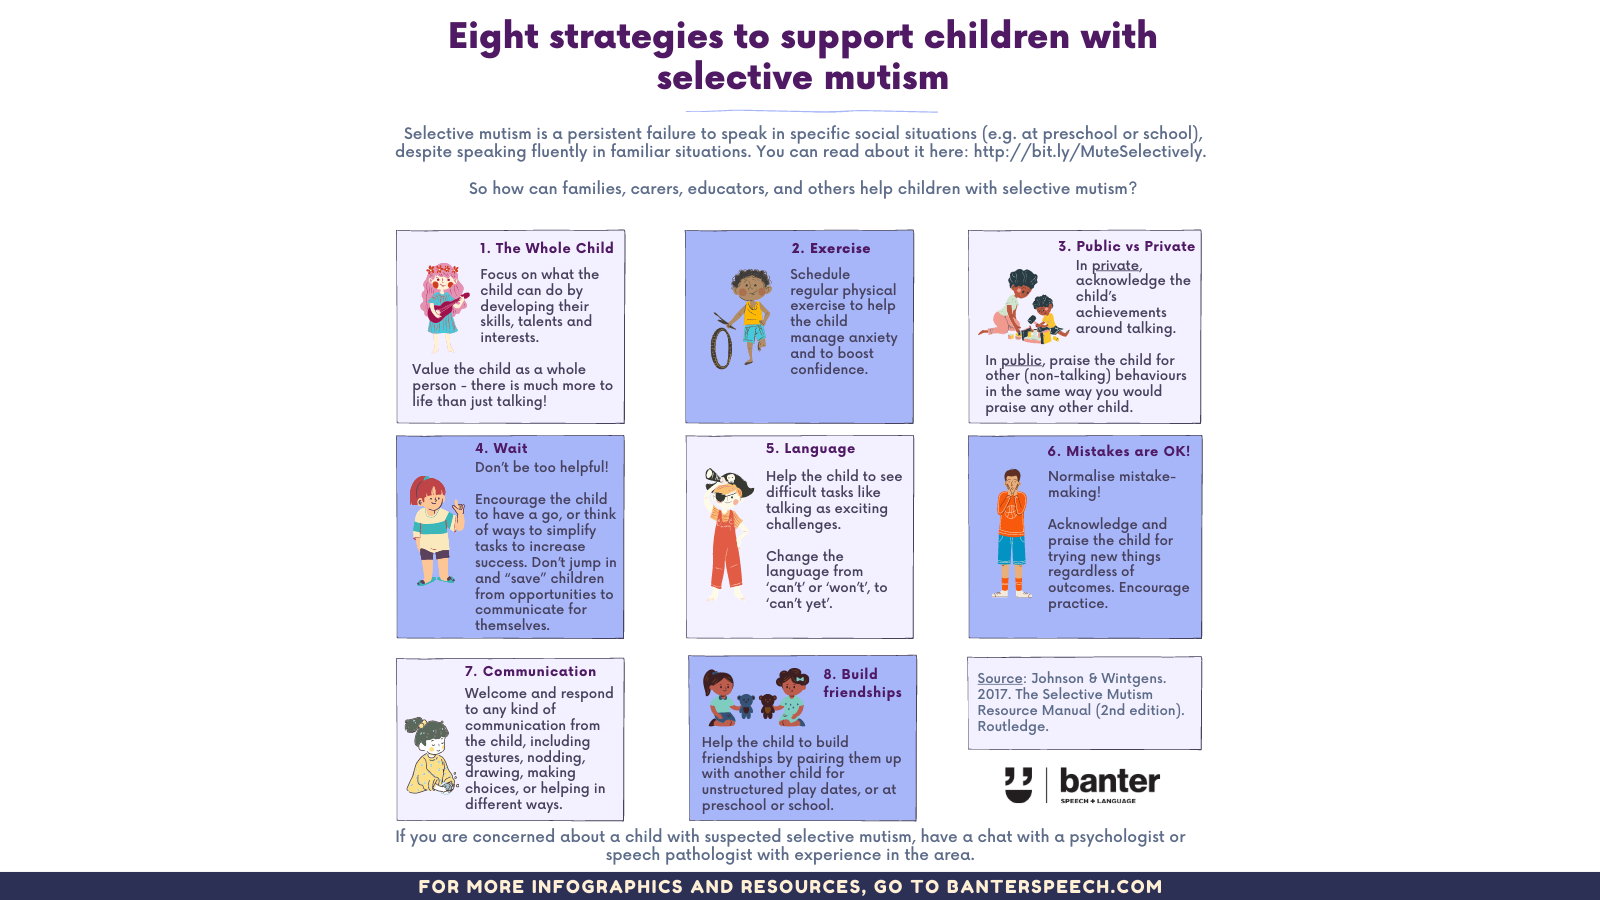 Eight strategies to support children with selective mutism